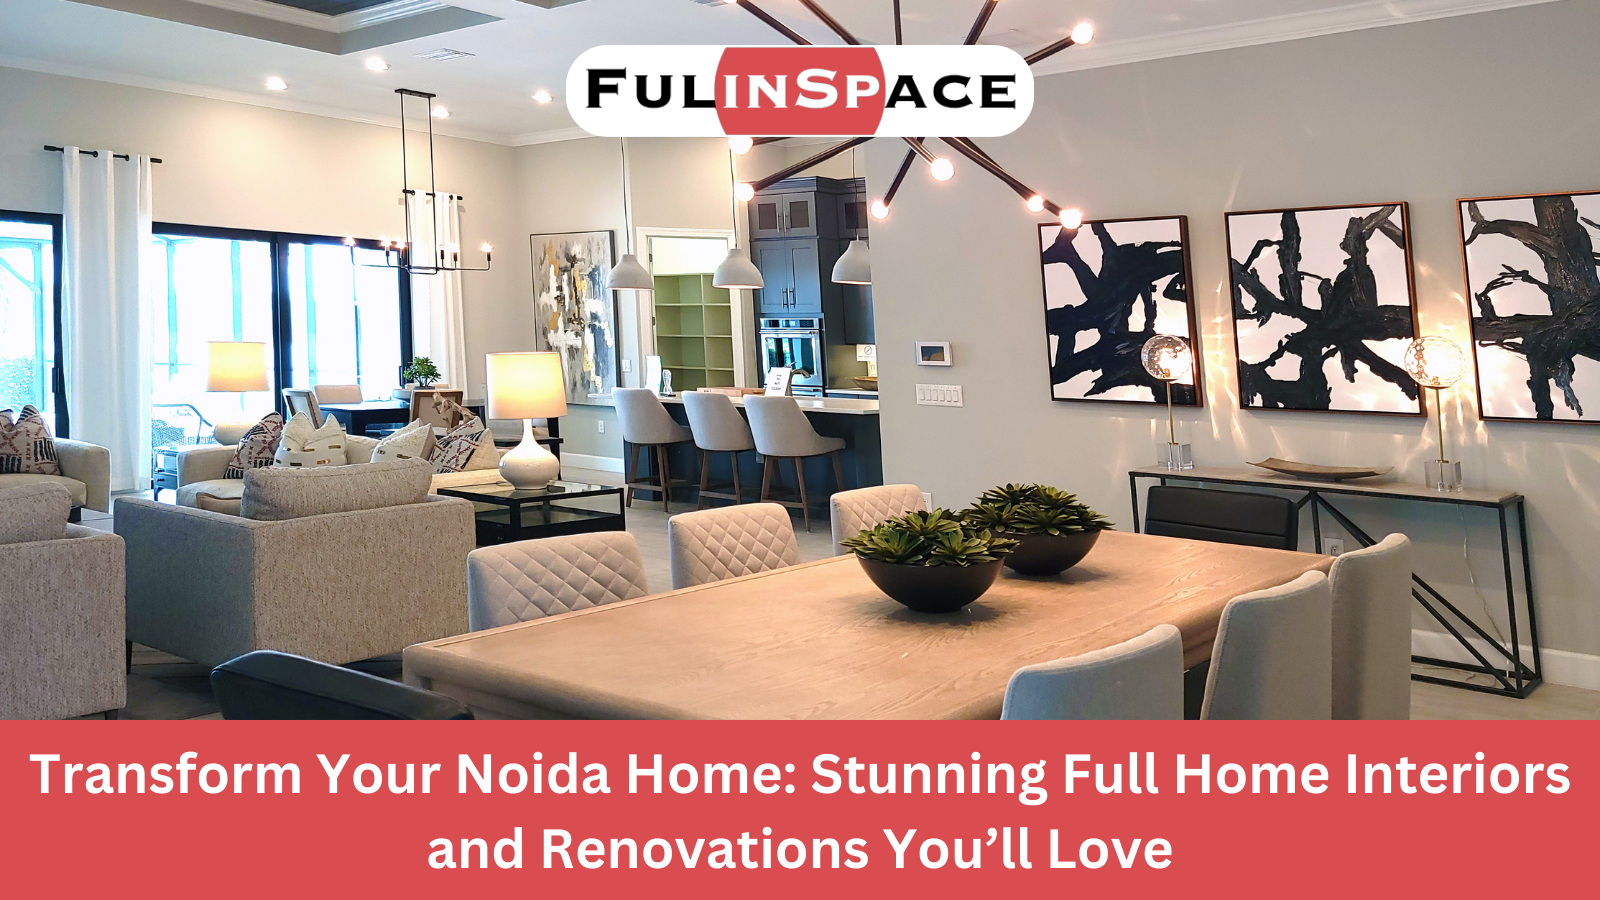 Transform Your Noida Home: Stunning Full Home Interiors and Renovations You’ll Love